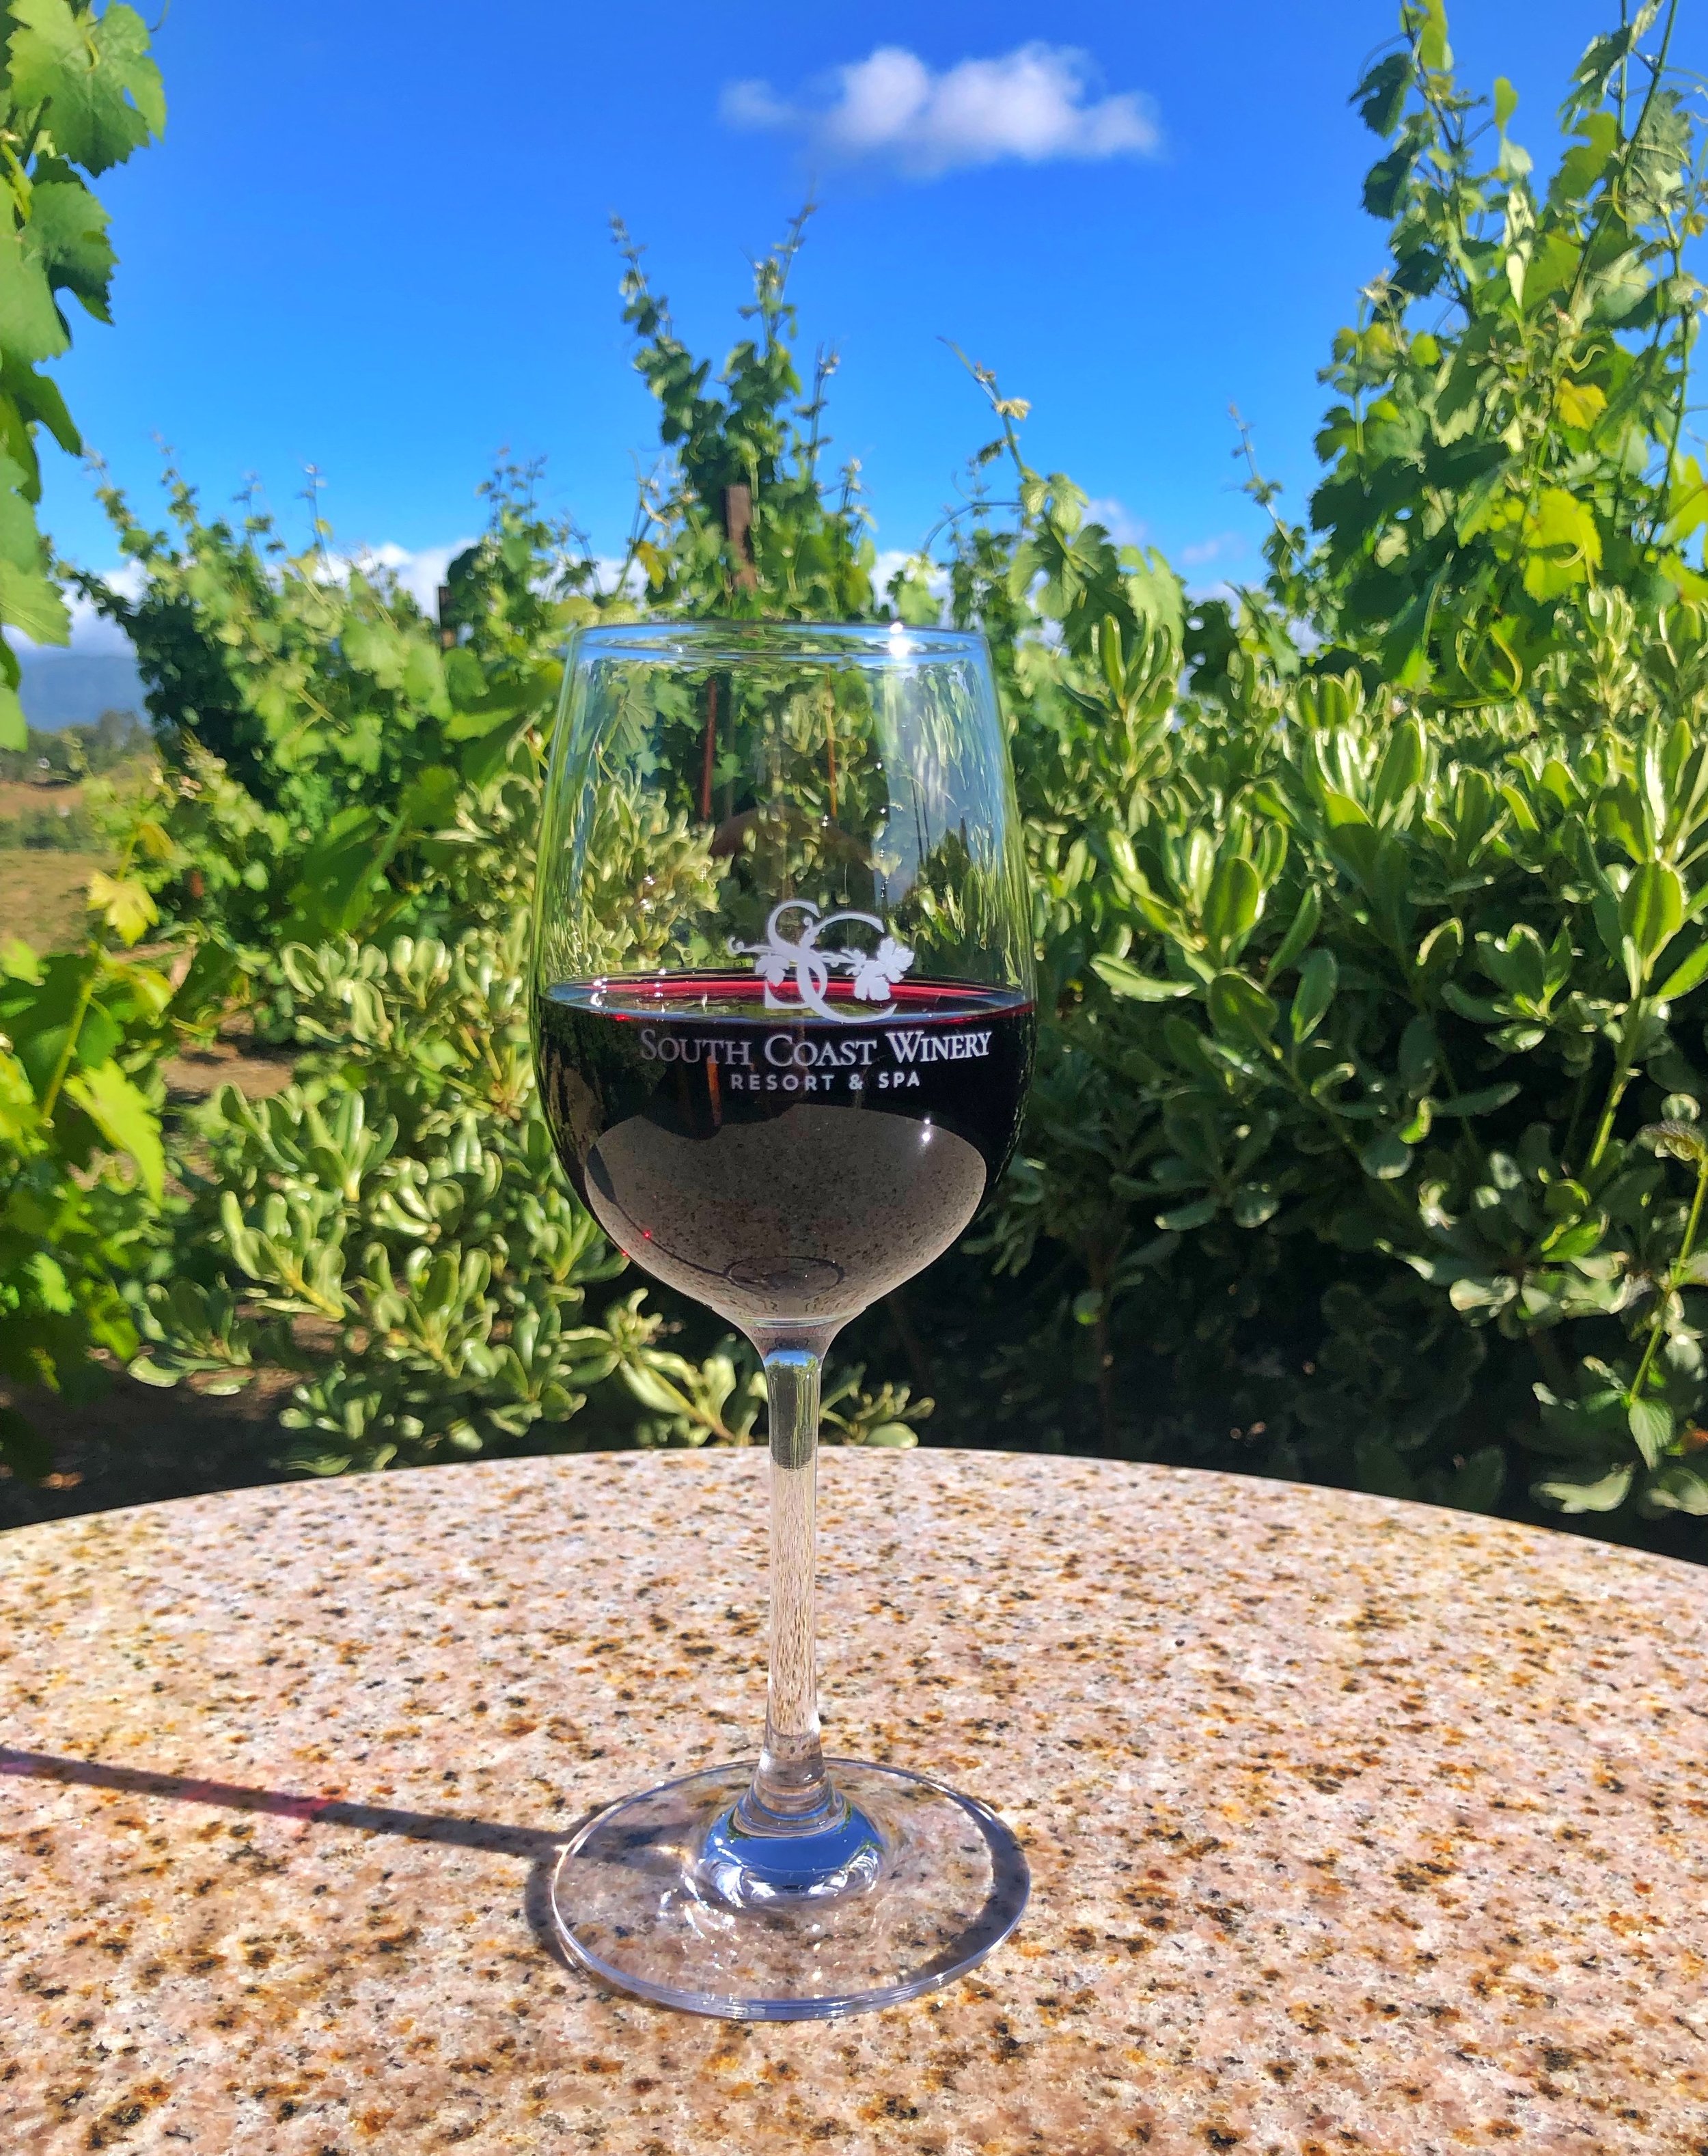 South Coast Winery Resort & Spa - Travel Guide